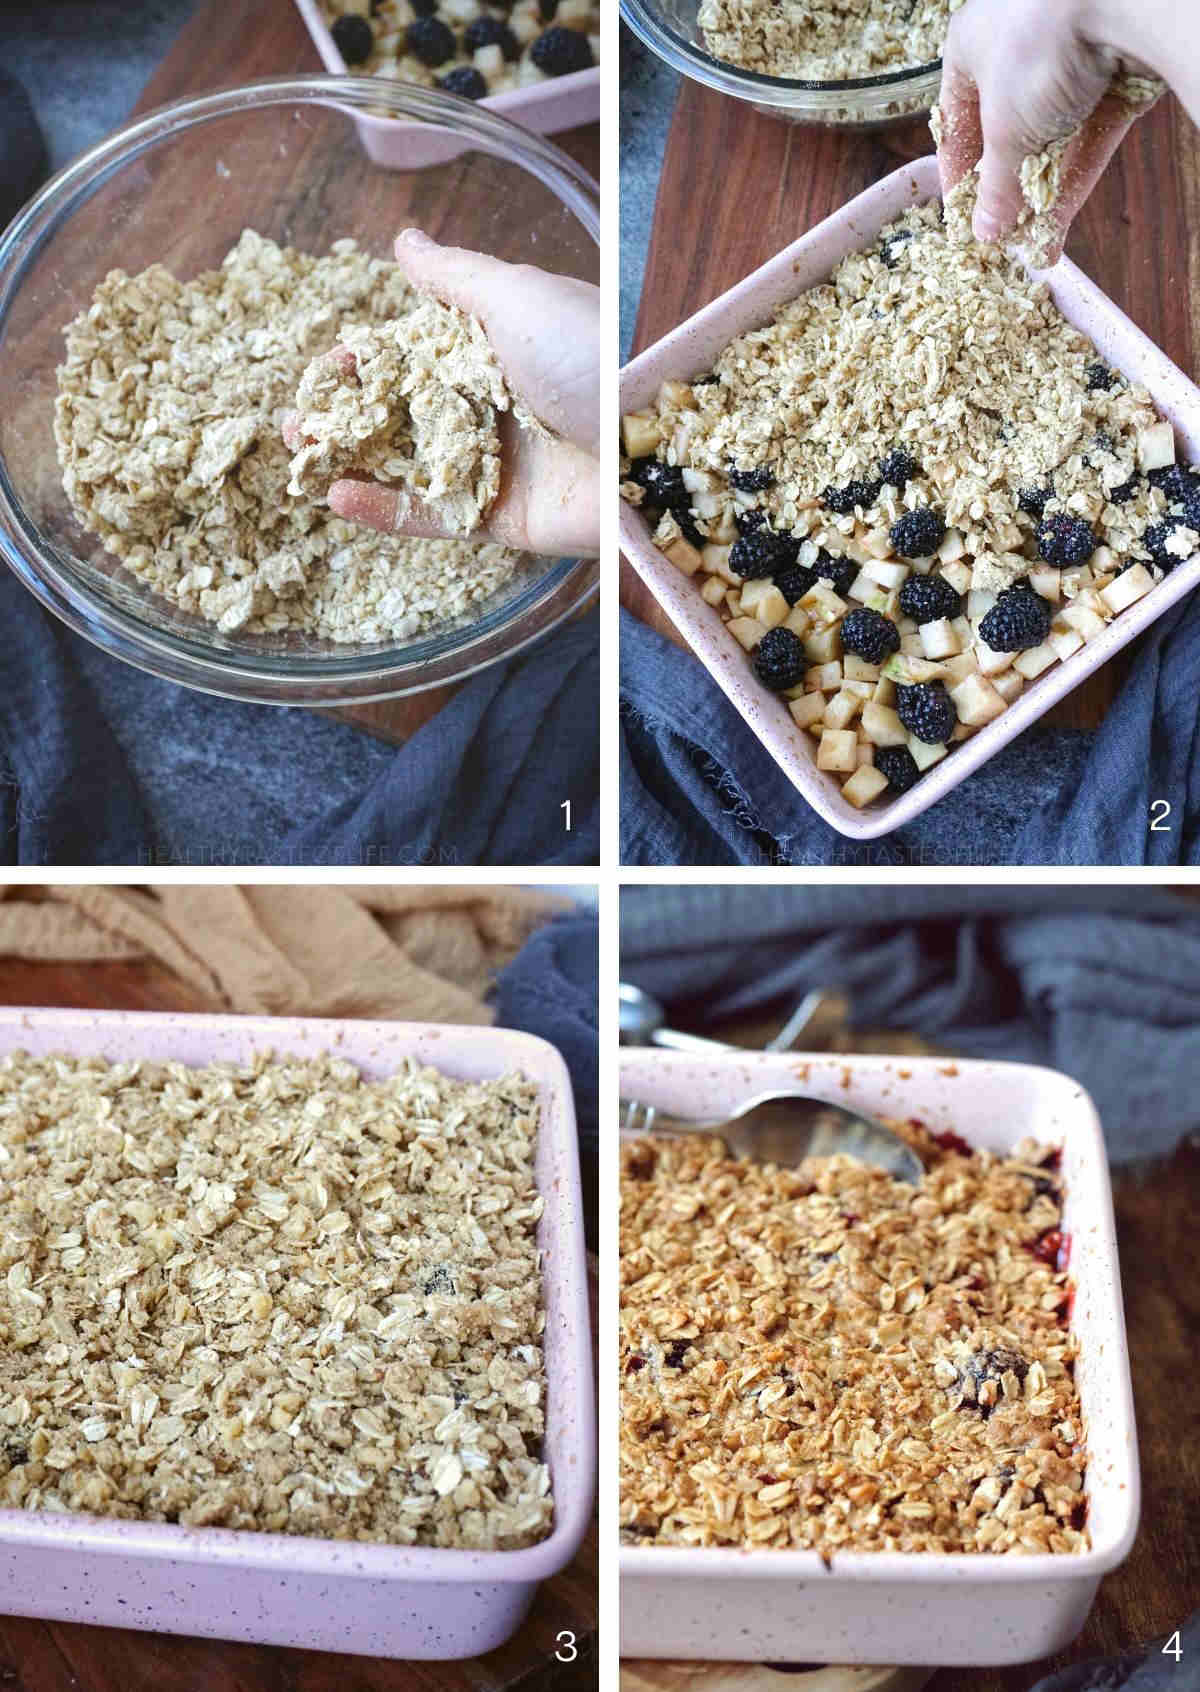 Step by step process shots showing how to assemble the blackberry and apple crumble and bake.